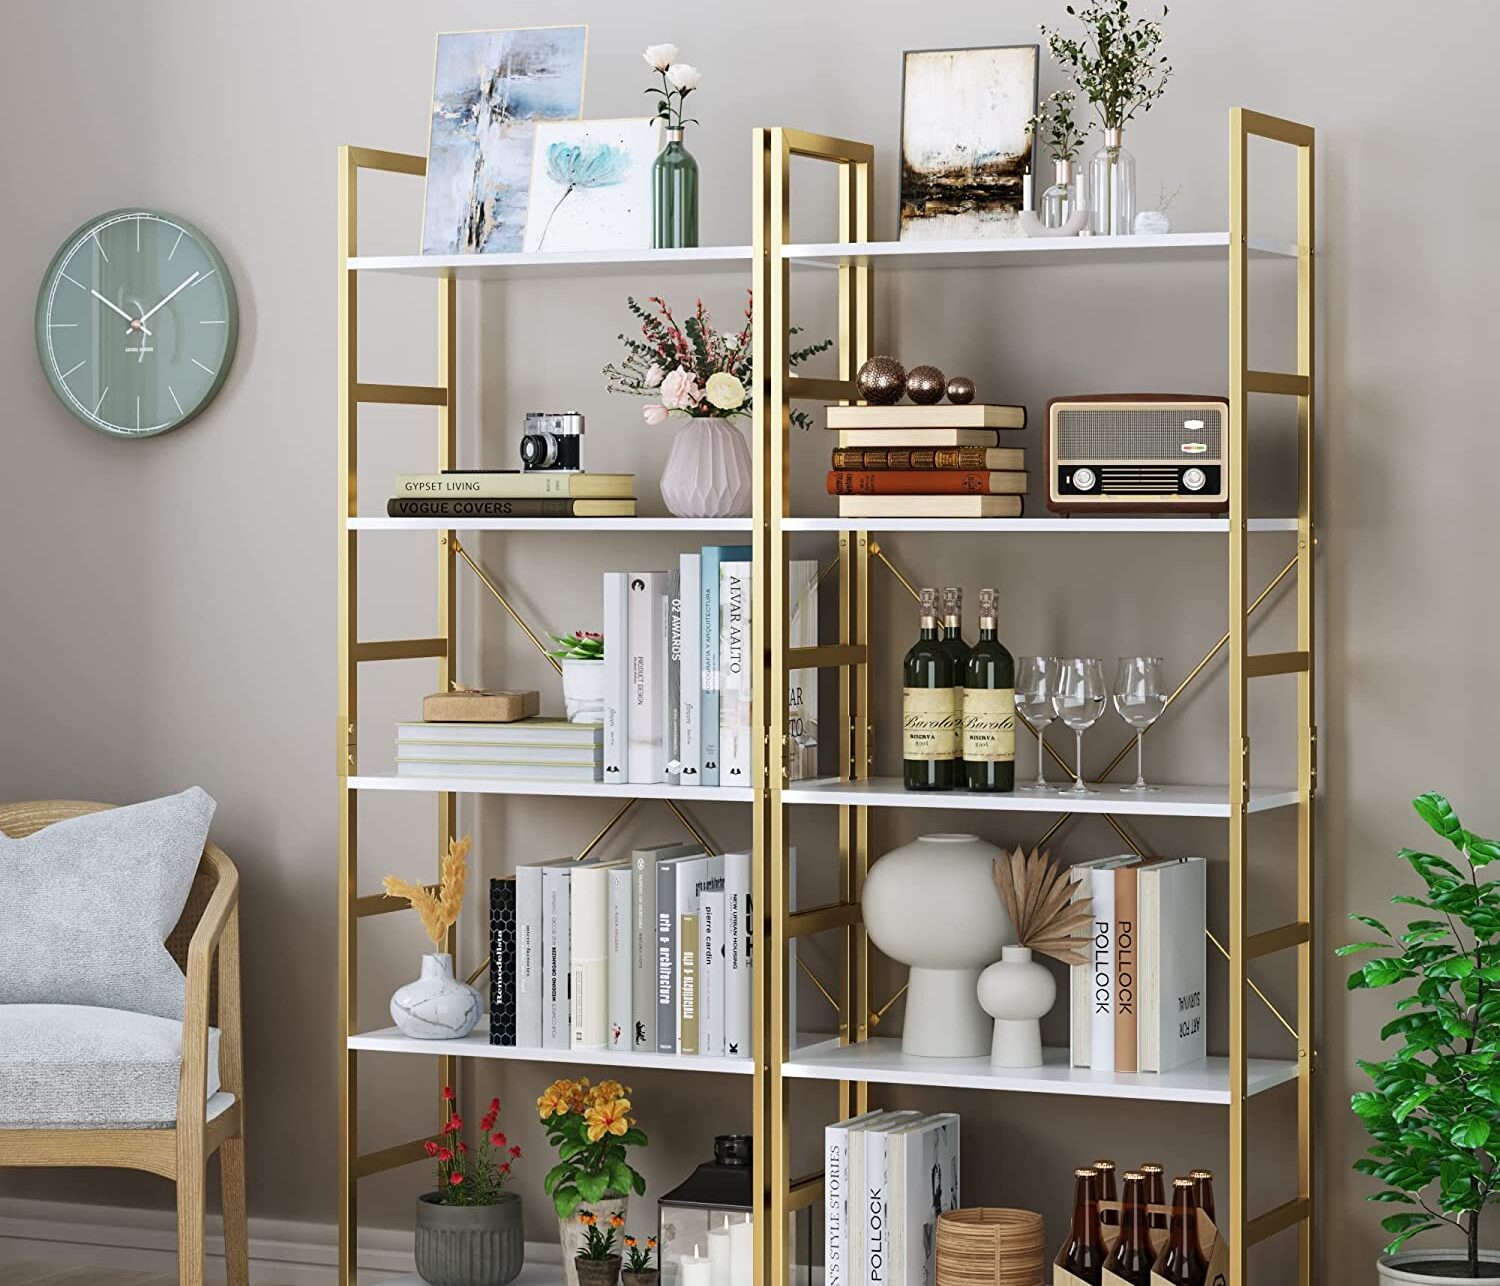 Finestones 5 Tier Bookshelf – durable, stylish and versatile for any space you could imagine